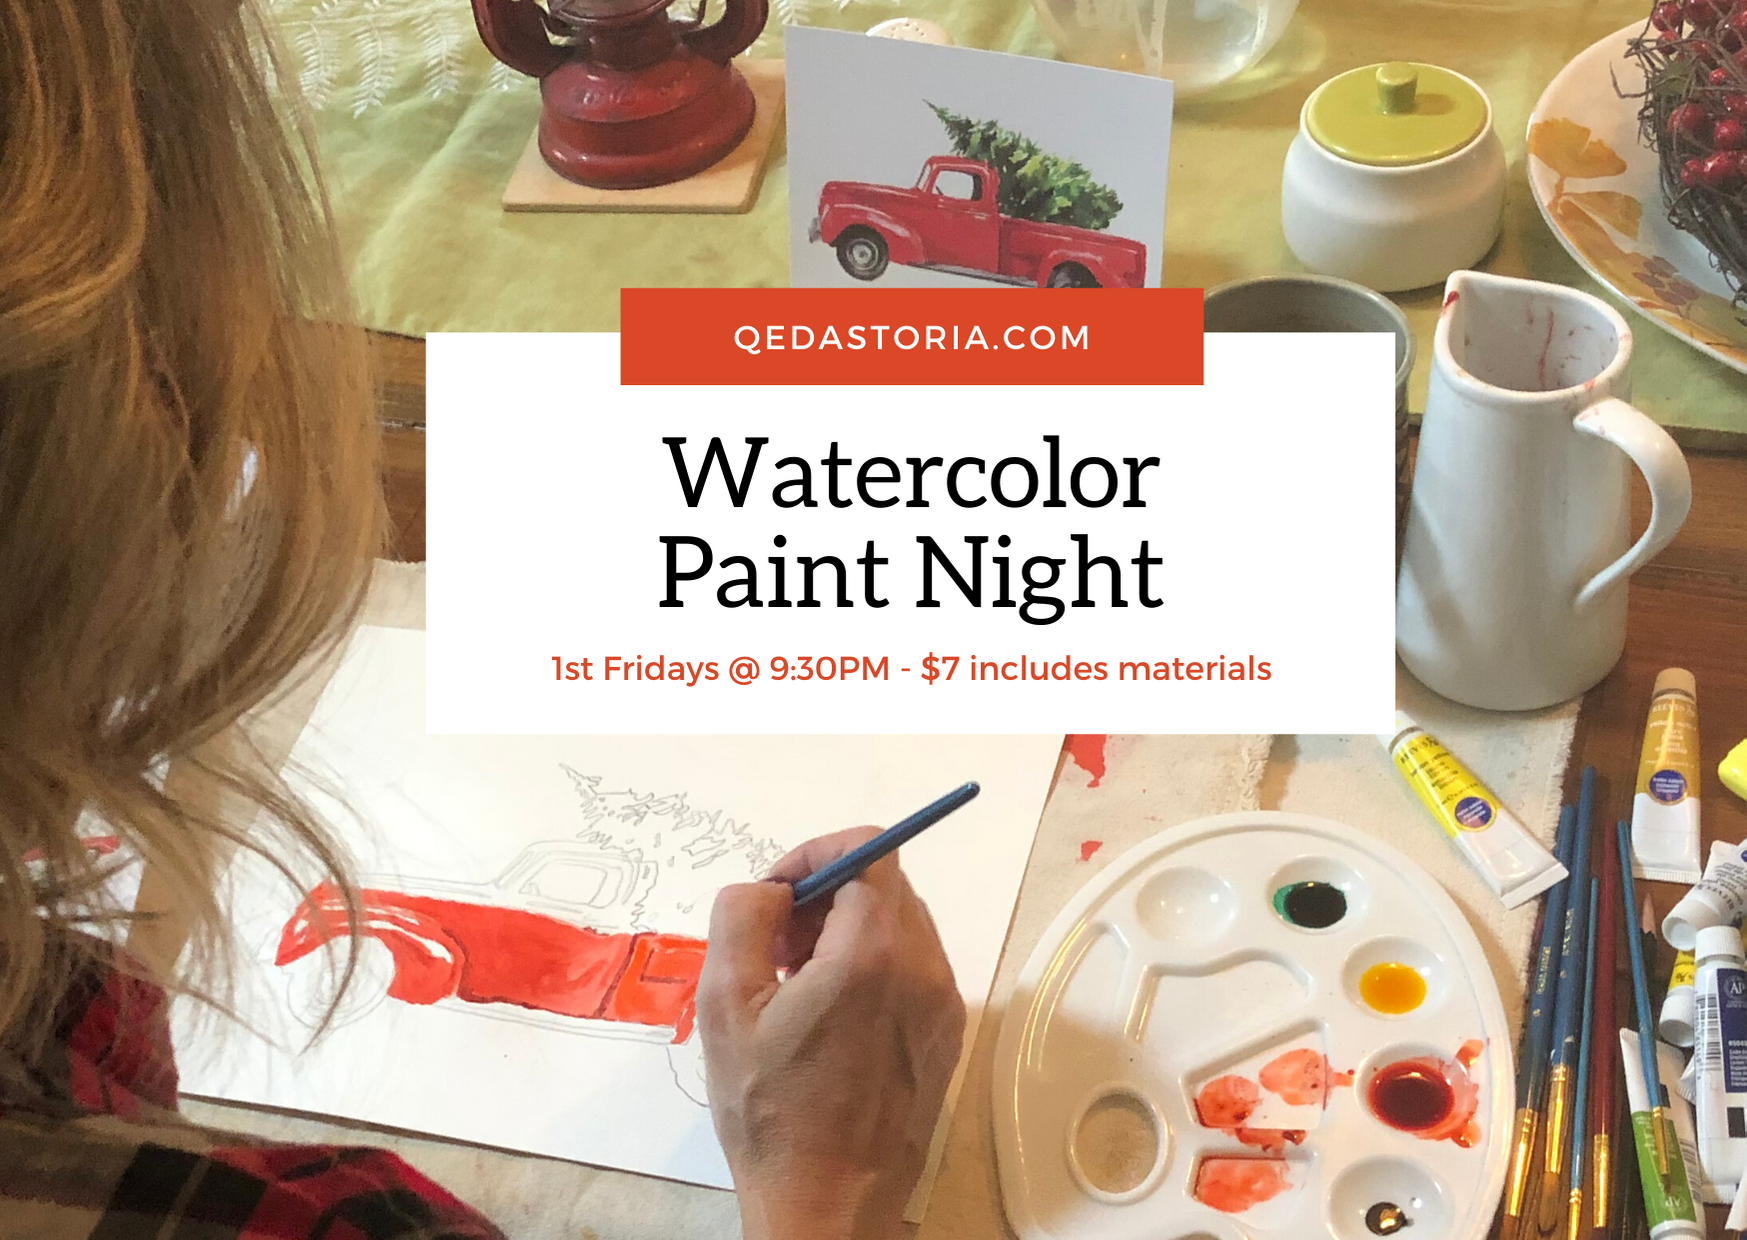 Watercolor Paint Night